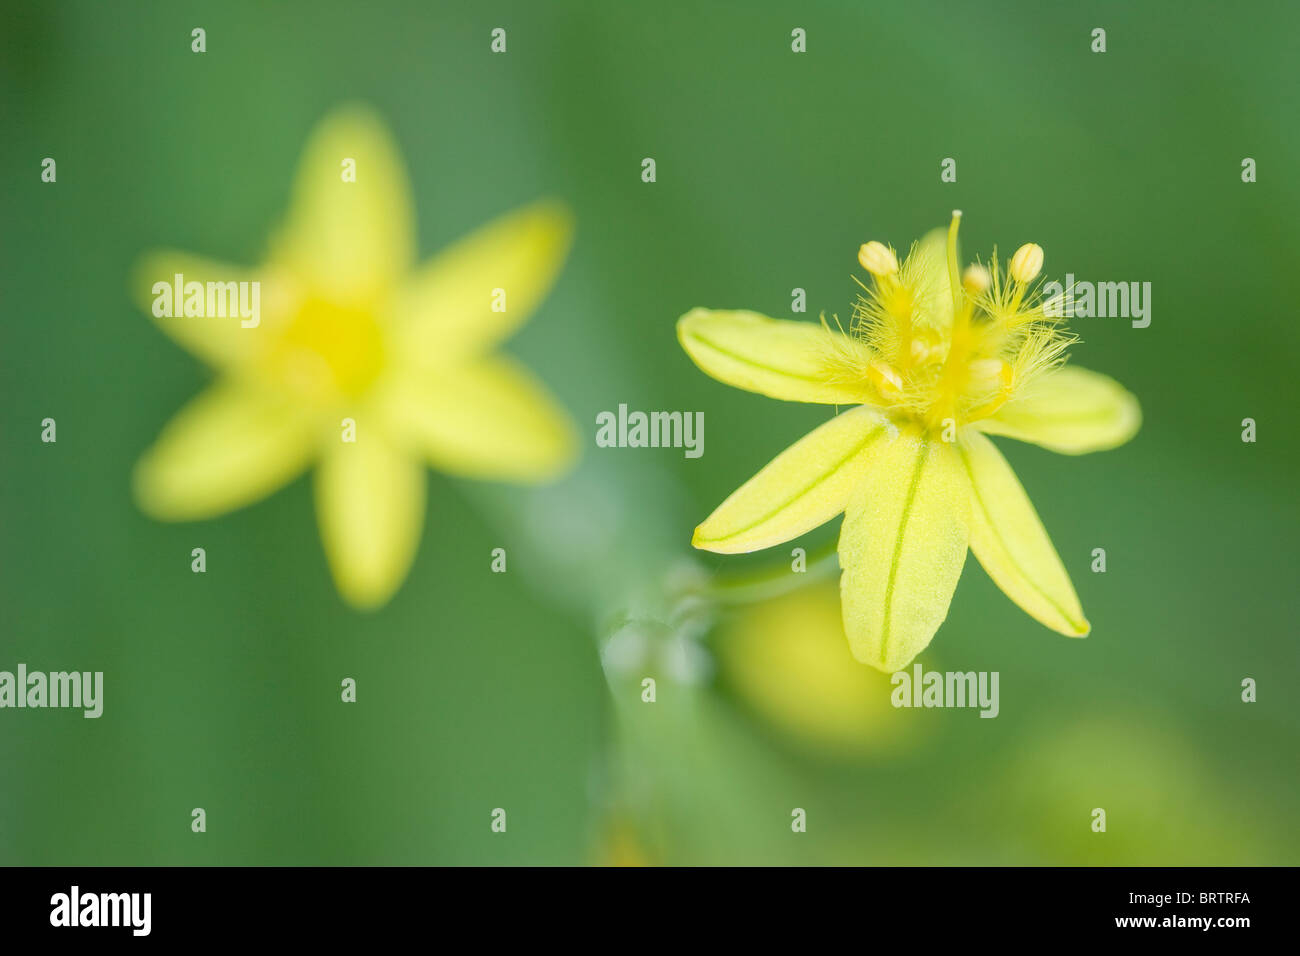 Yellow flowered form of Bulbine,frutescens in macro with smooth green background Stock Photo